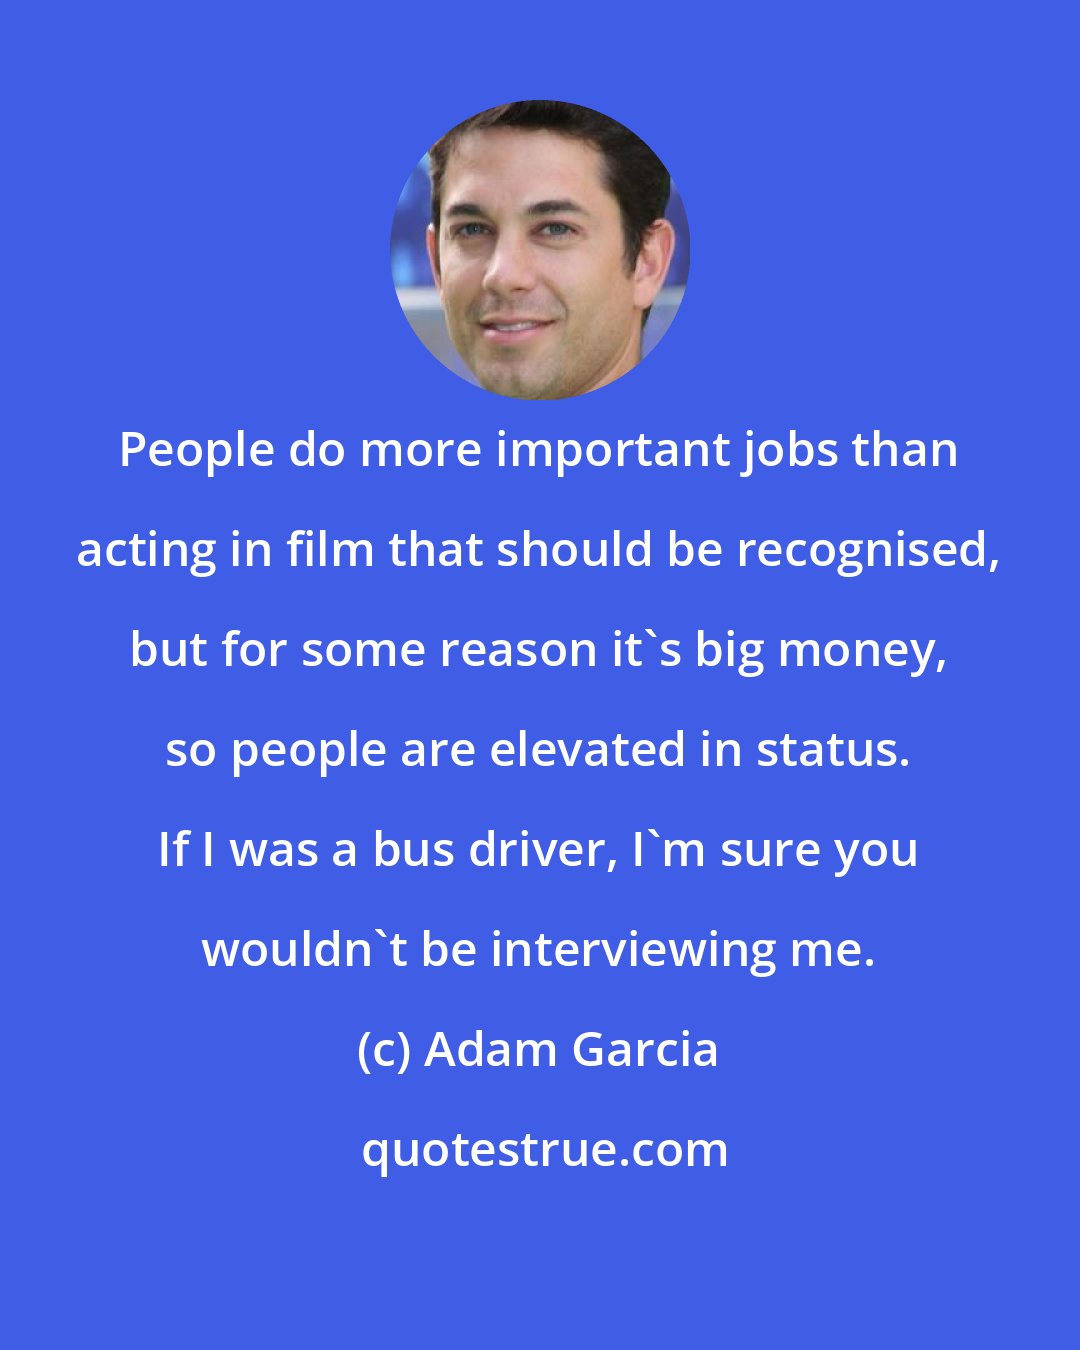 Adam Garcia: People do more important jobs than acting in film that should be recognised, but for some reason it's big money, so people are elevated in status. If I was a bus driver, I'm sure you wouldn't be interviewing me.